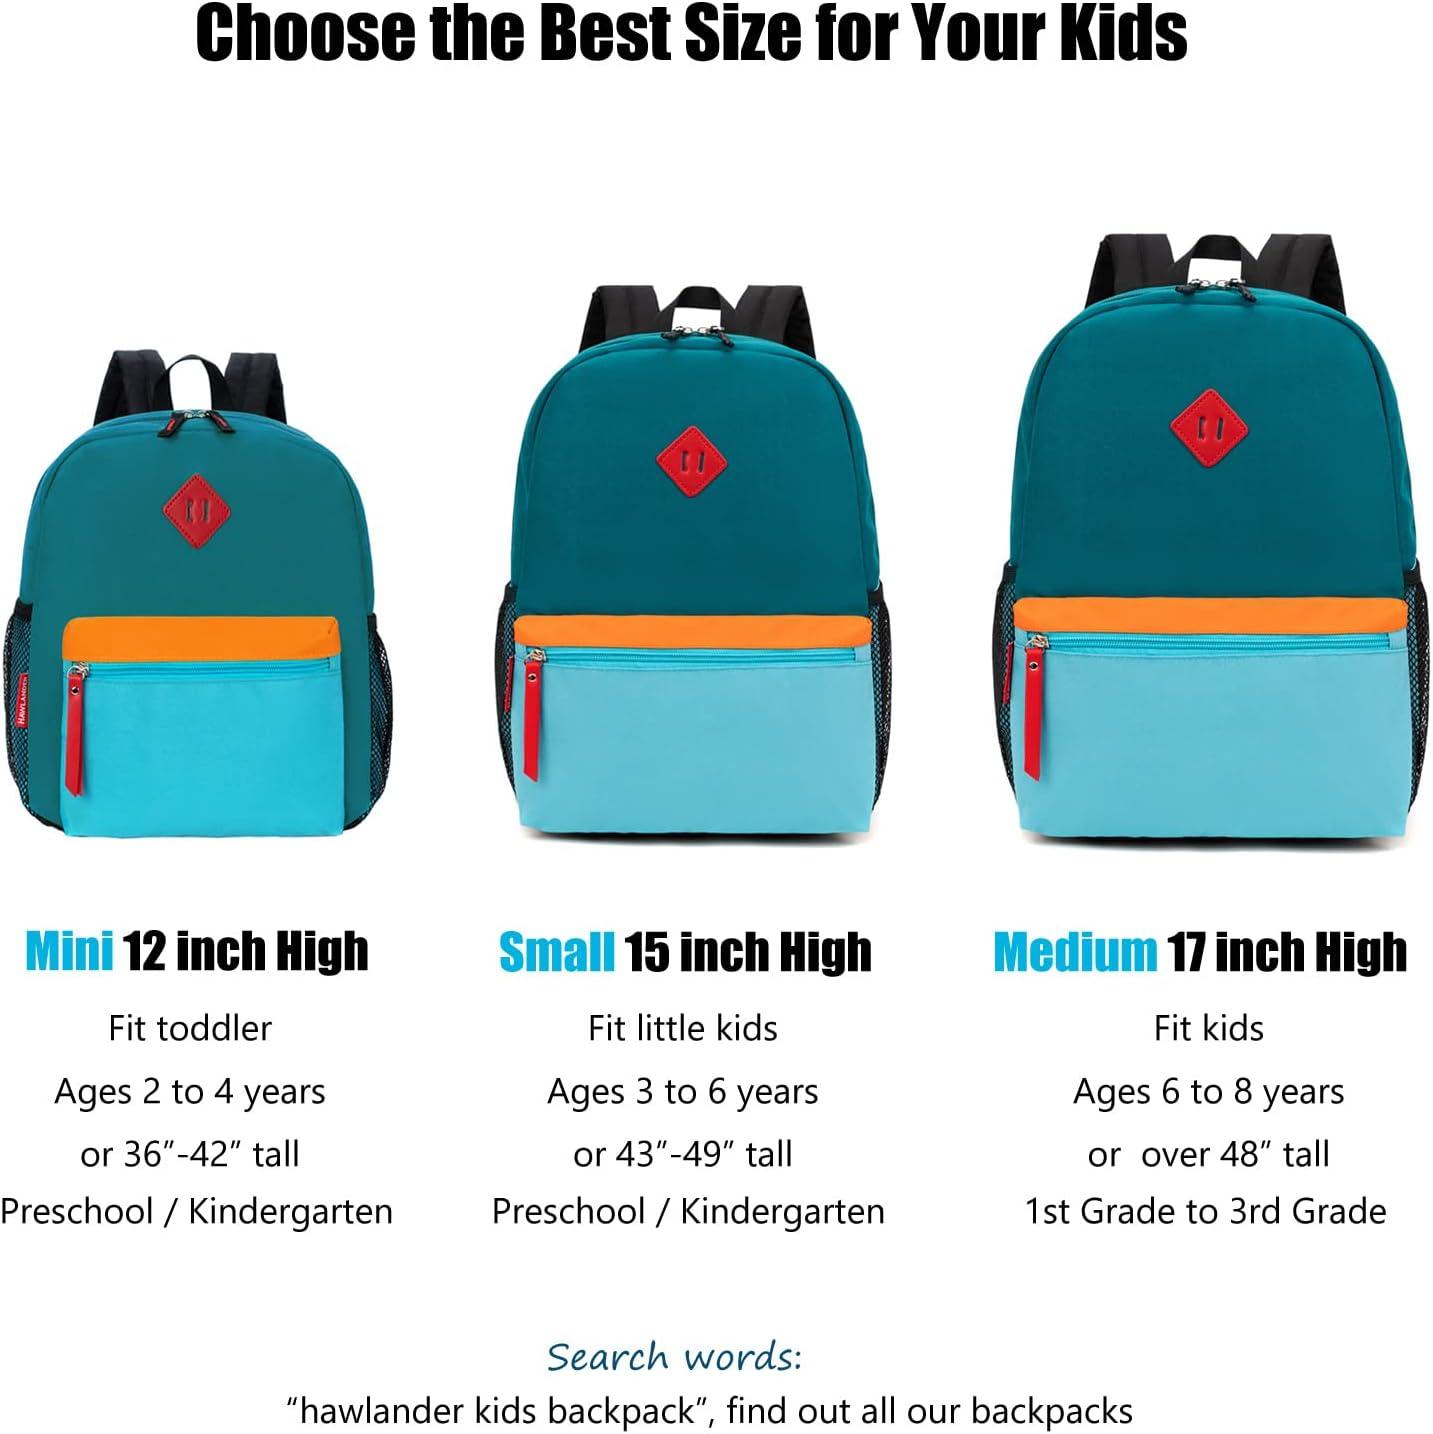 HawLander Little Kids Backpack for Boys Toddler School Bag Fits 3 to 6 Years Old, 15 inch, Blue Green